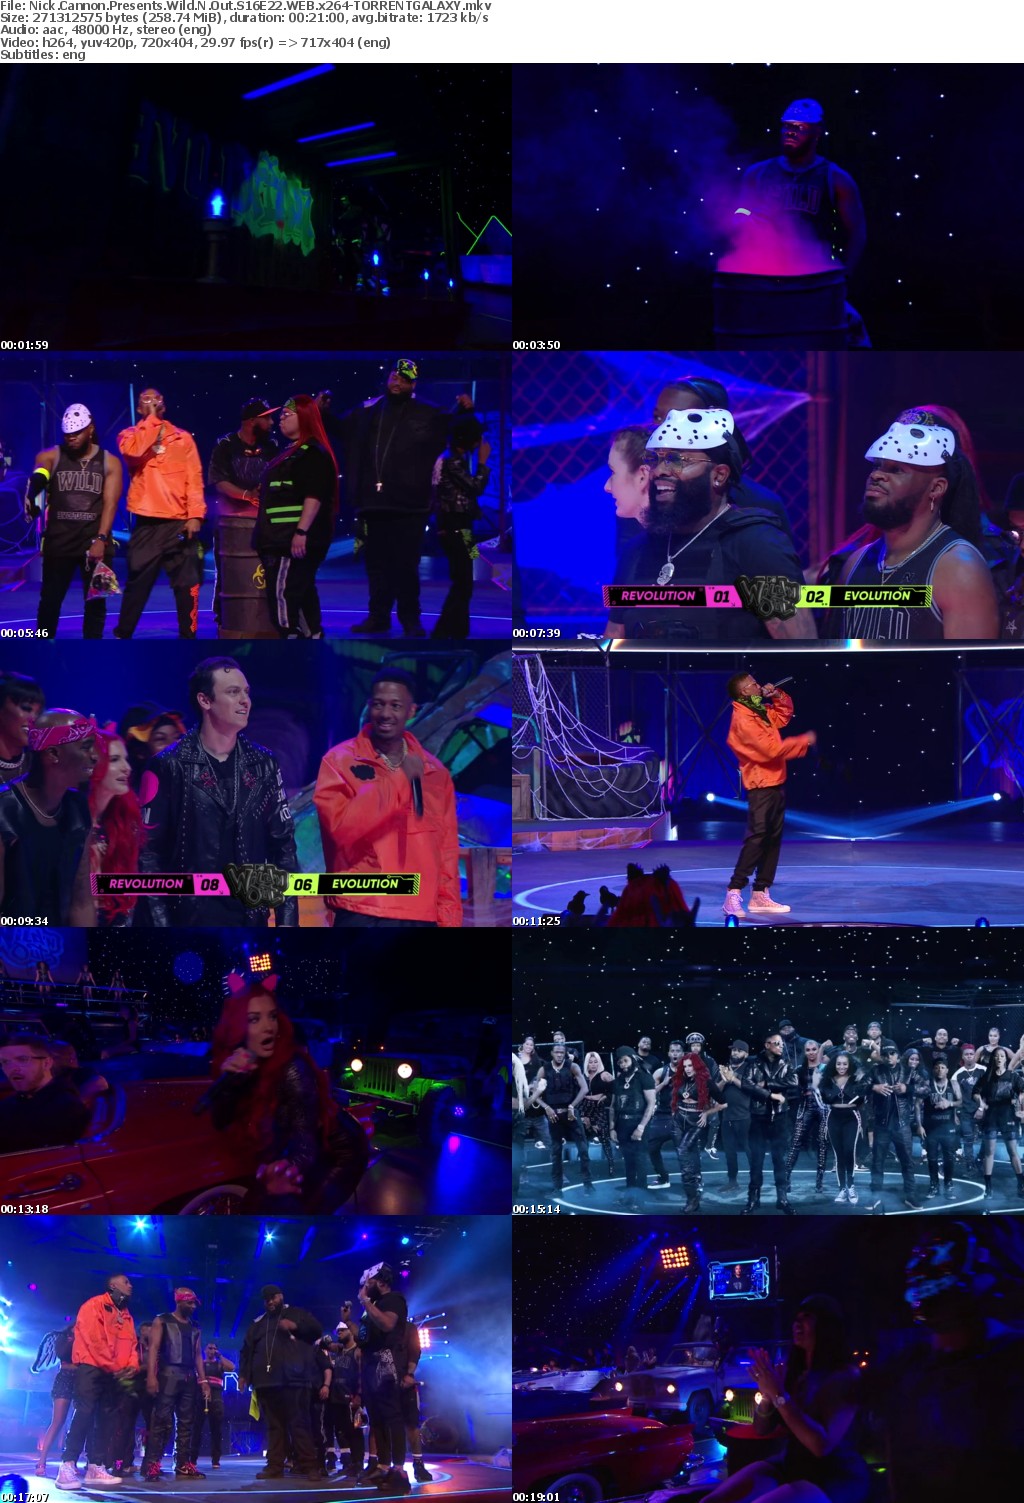 Nick Cannon Presents Wild N Out S16E22 WEB x264-GALAXY